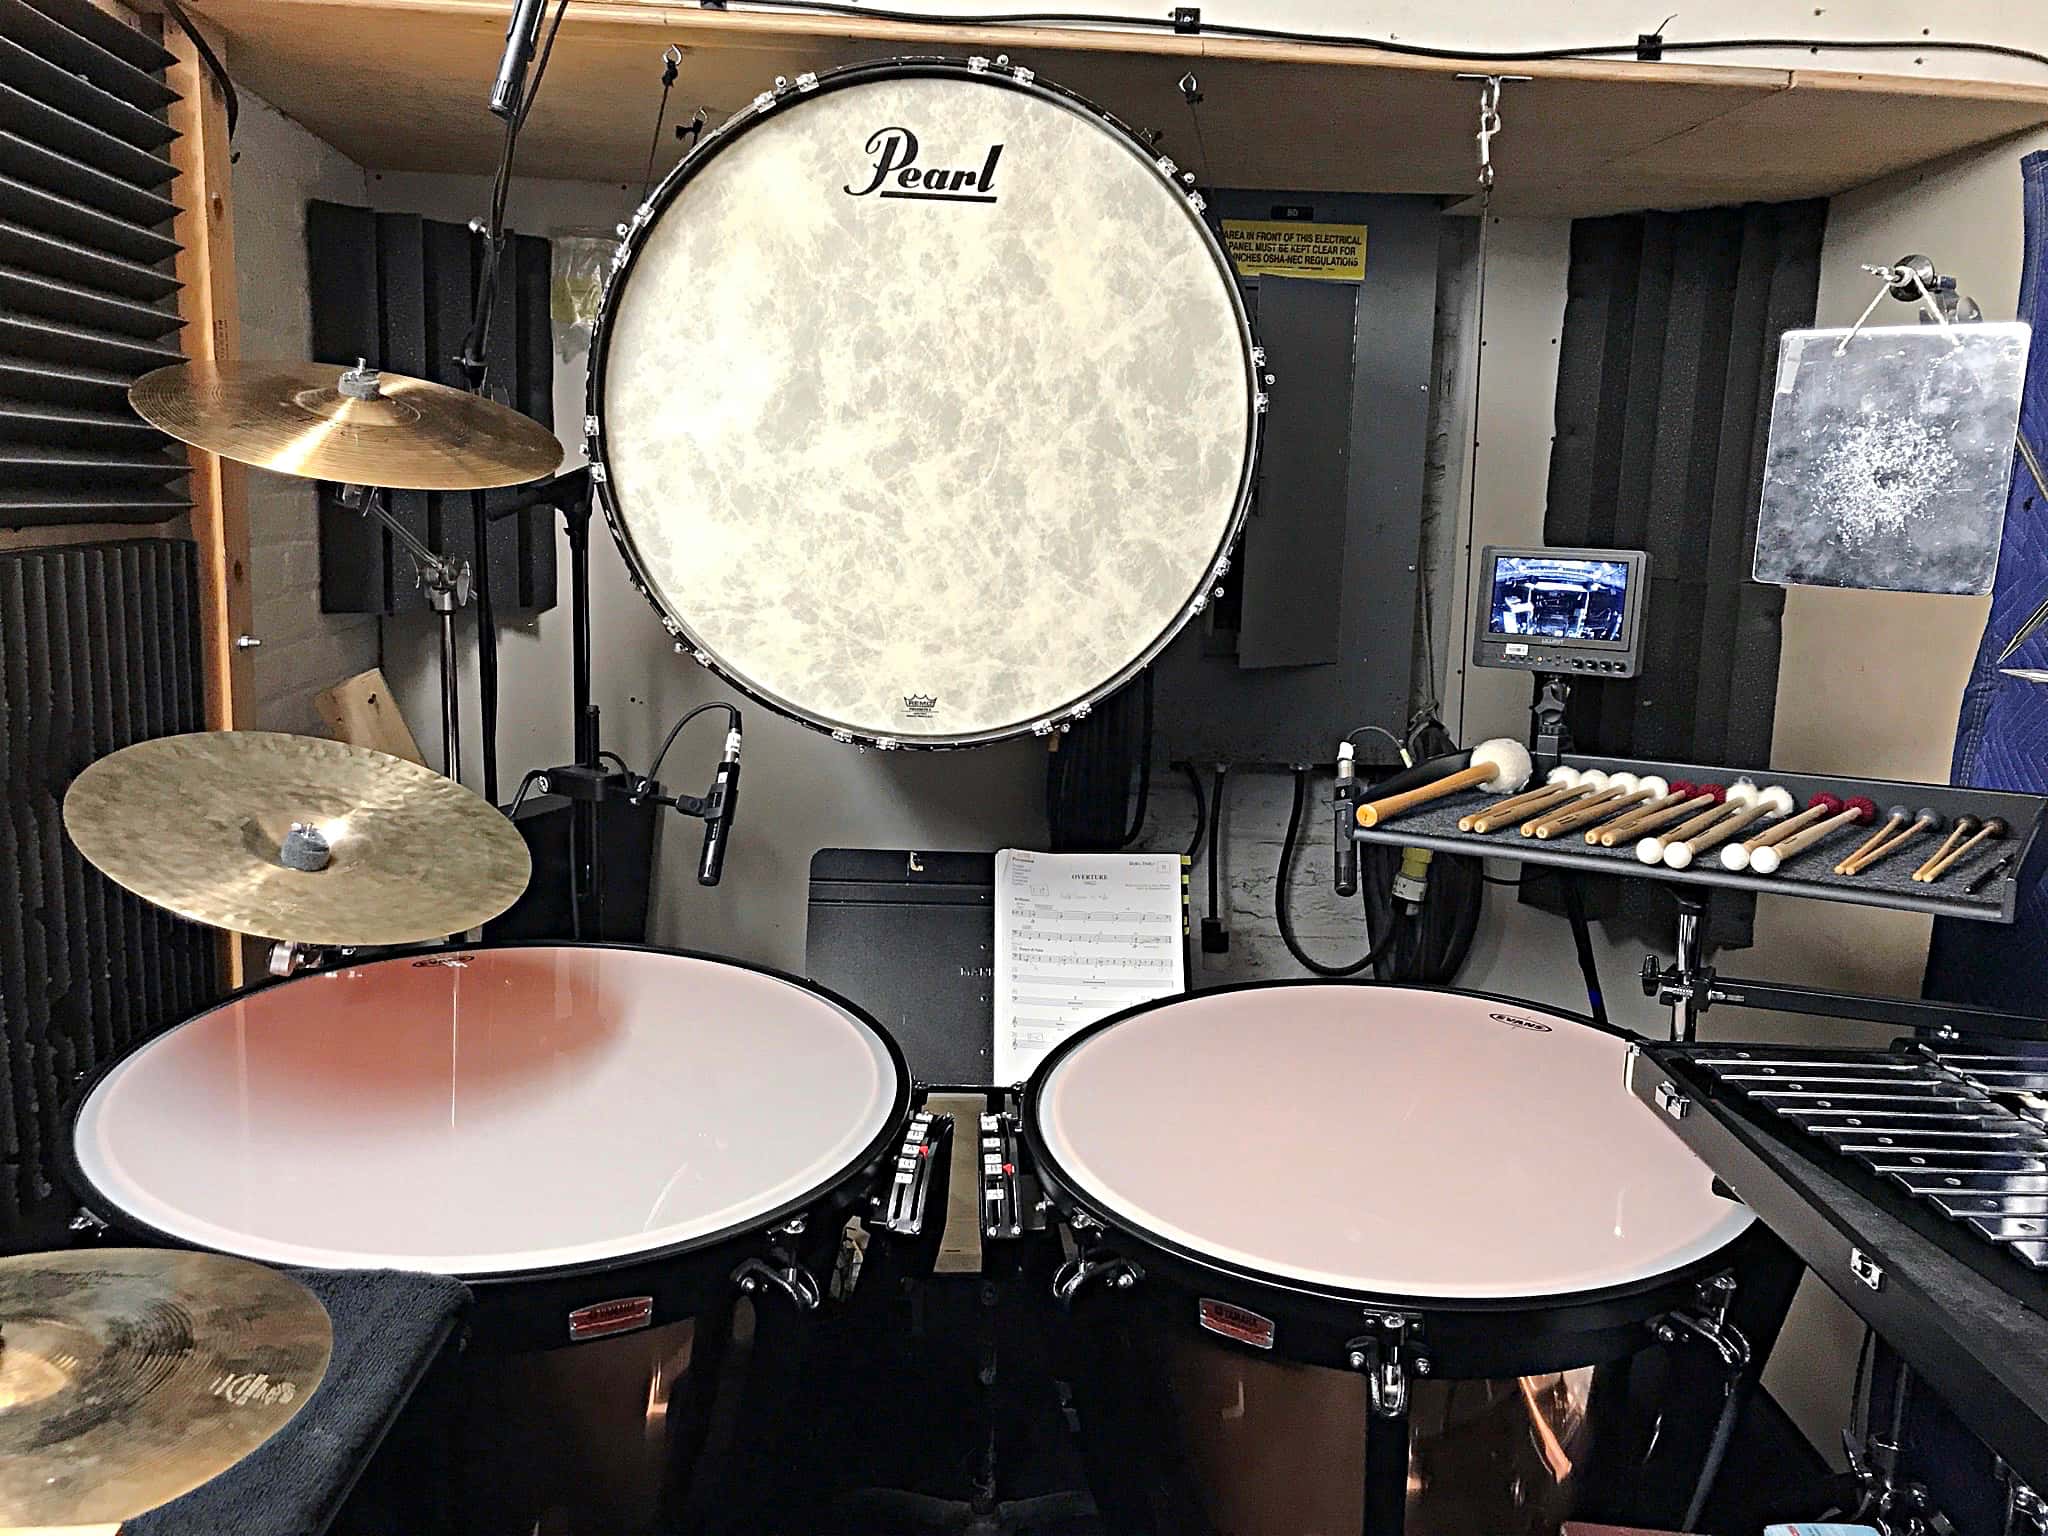 Andy Blanco’s percussion setup for the 2017-2018 Broadway production of Hello, Dolly! at the Shubert Theater.